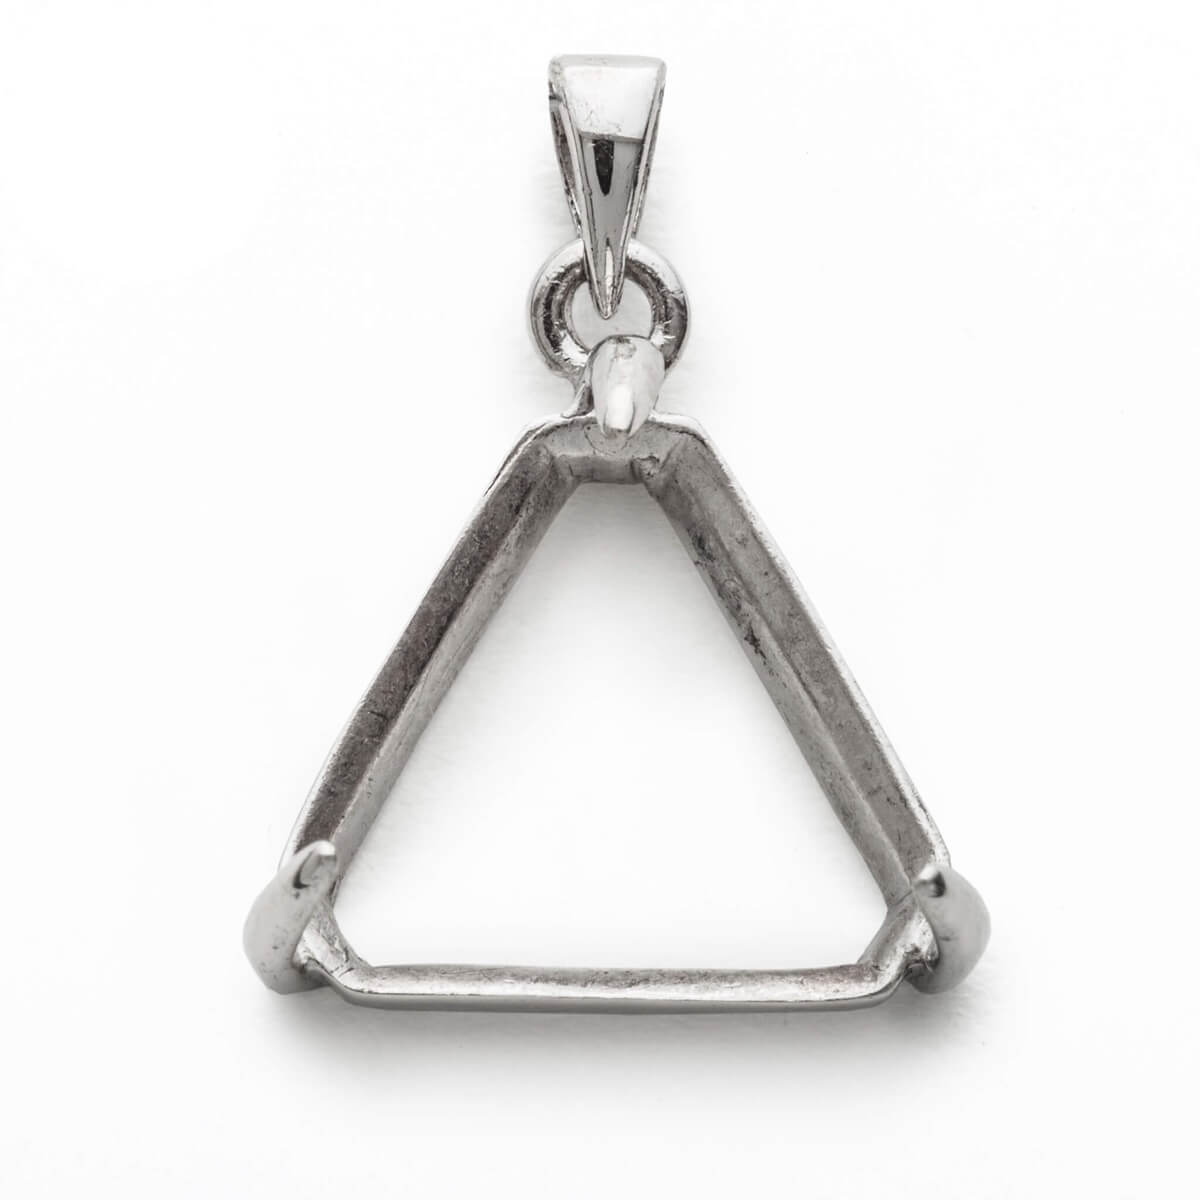 Triangular Pendant with Triangular Mounting and Bail in Sterling Silver 14x14mm 